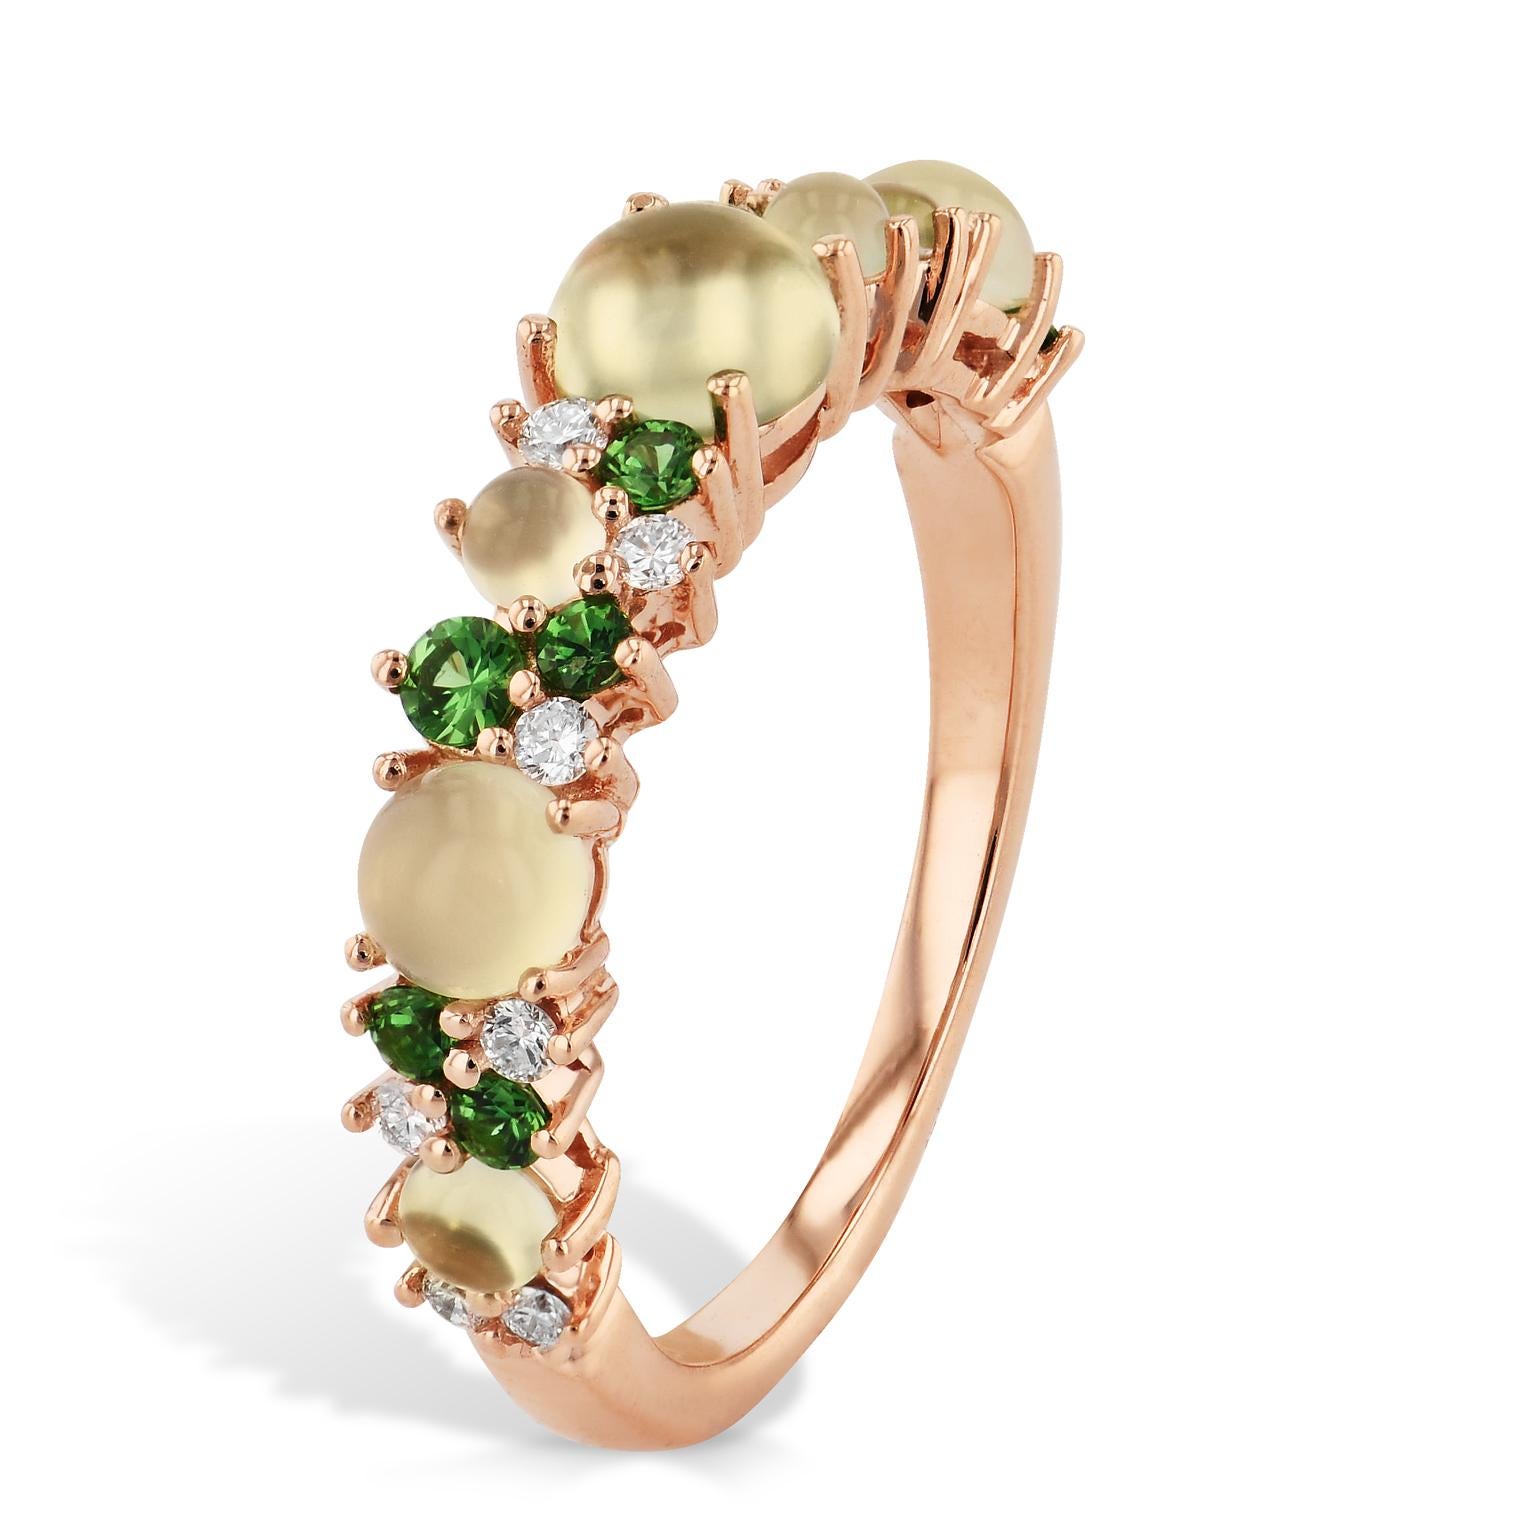 Break out of the ordinary in your style with this eye catching display of cabochon cut olive chalcedony, diamonds, and prehnite stones all held in a 18 karat rose gold band.